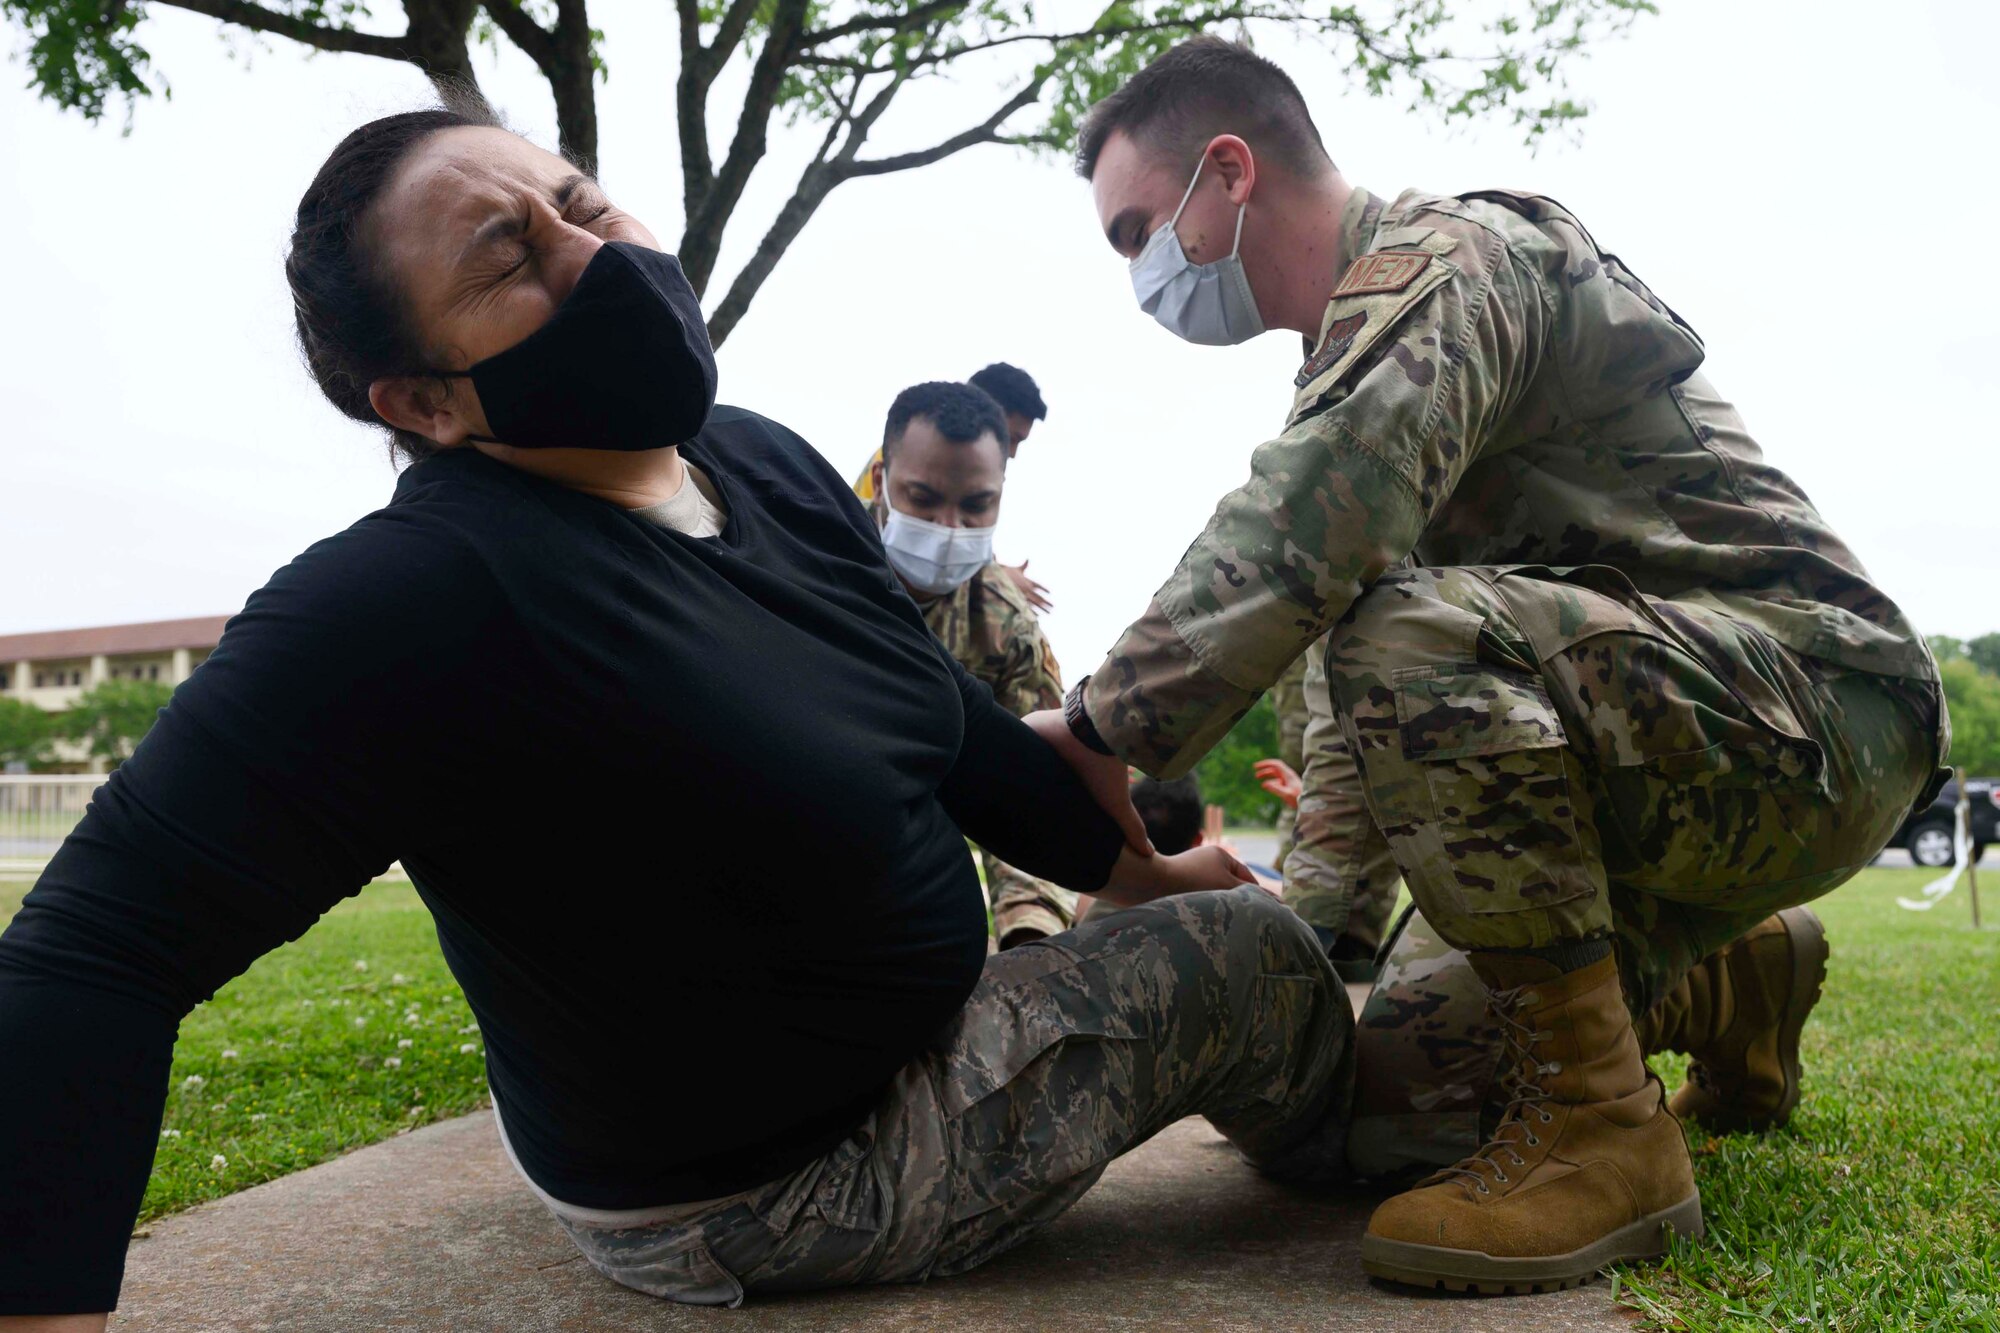 An Airman pretends to grimace in pain as other Airmen work on her during an exercise.